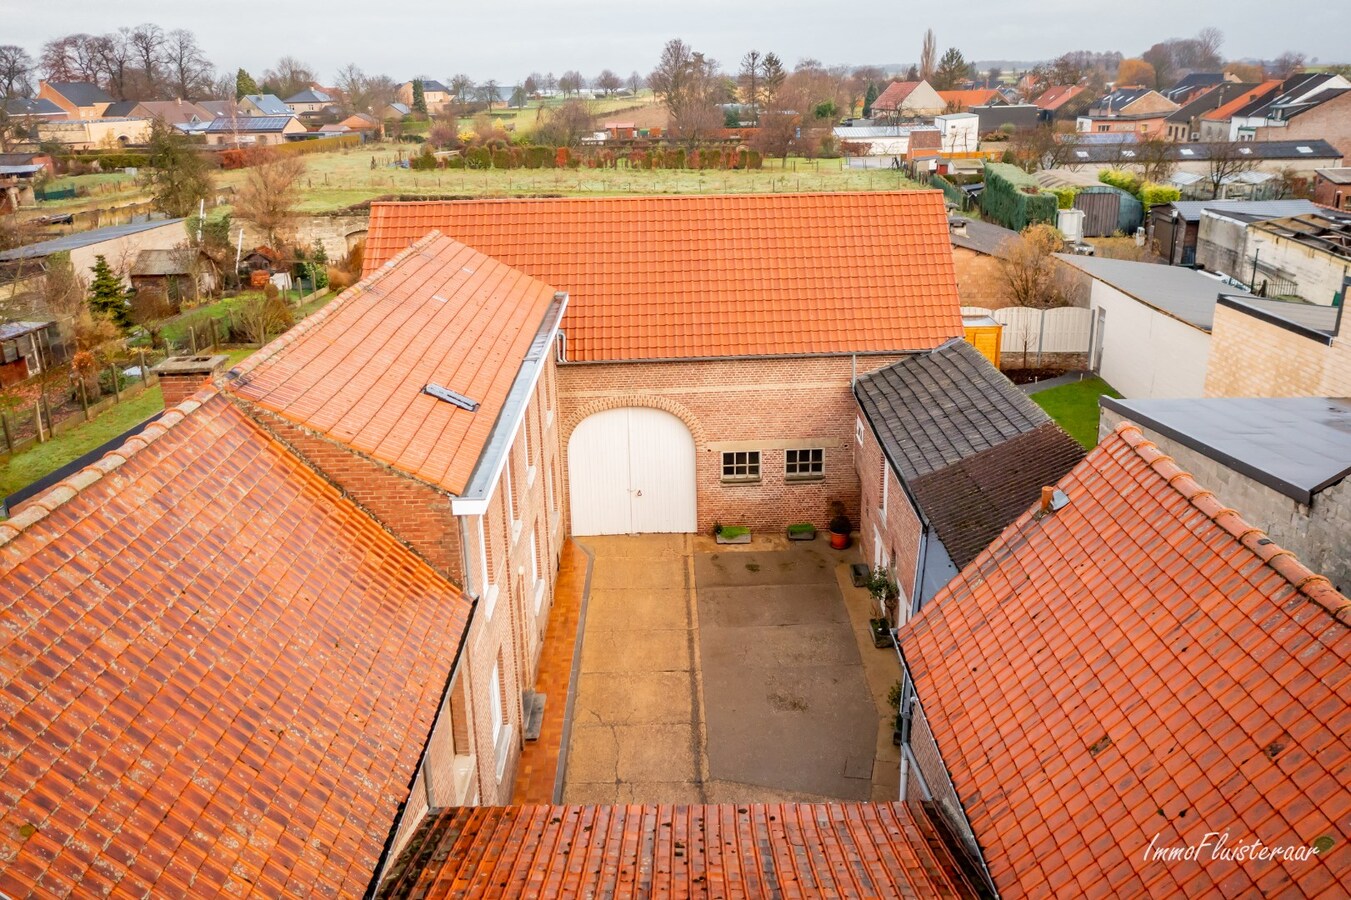 Property sold in Riemst